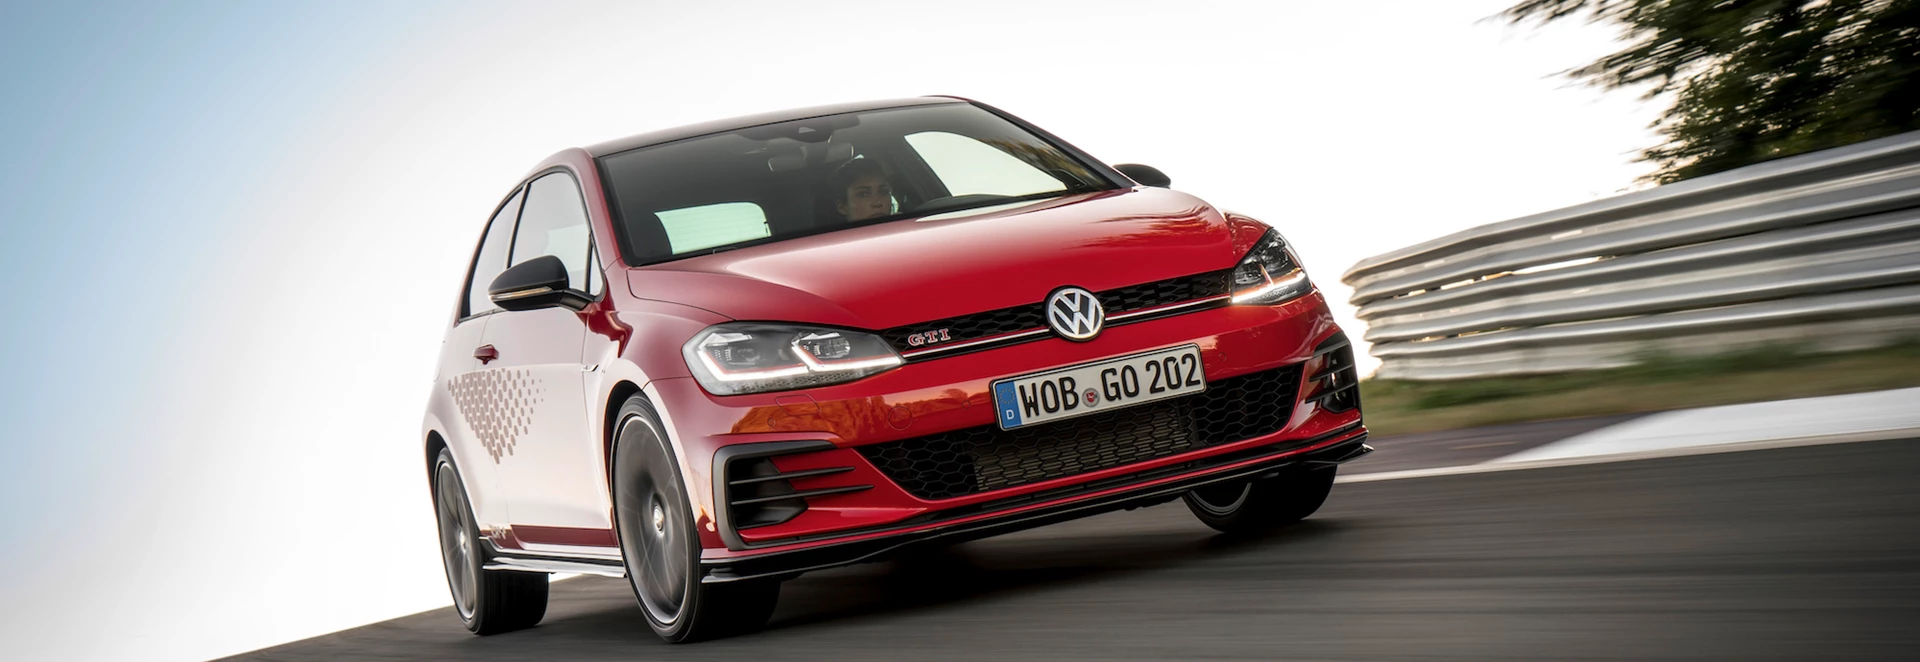 Volkswagen Golf GTI TCR revealed with 287bhp